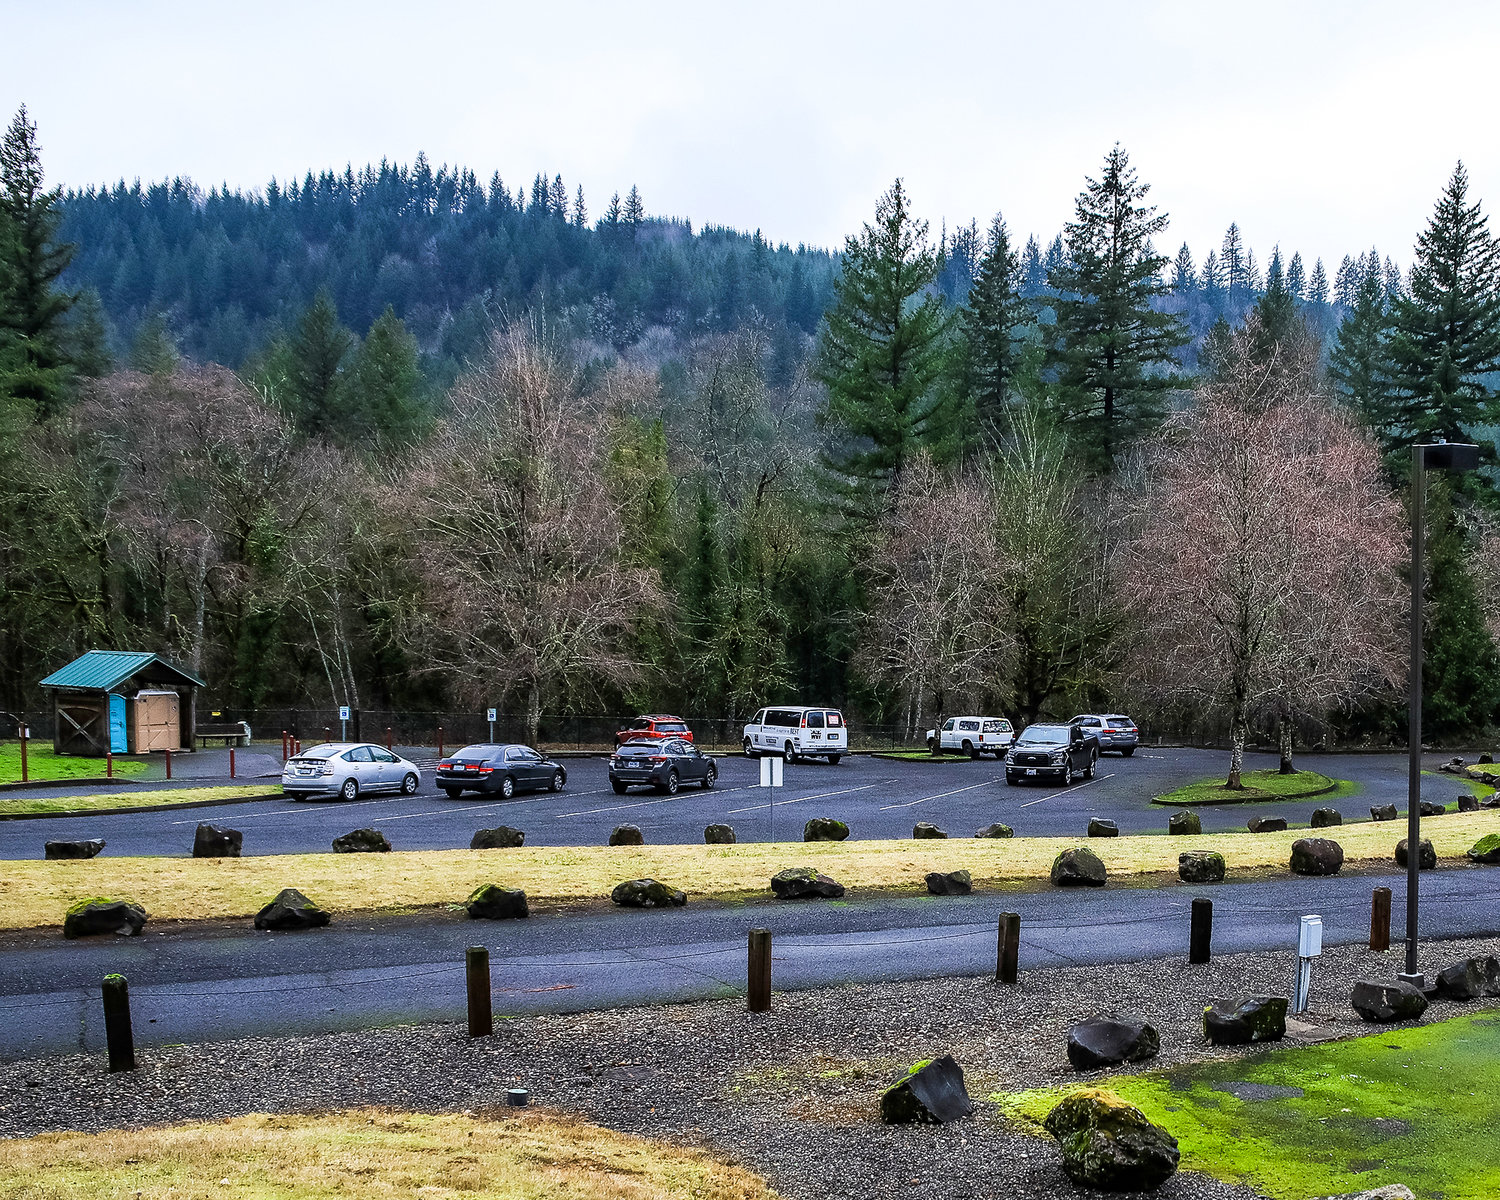 Vehicles take up spots in the parking lot at the Hantwick Road Trailhead.